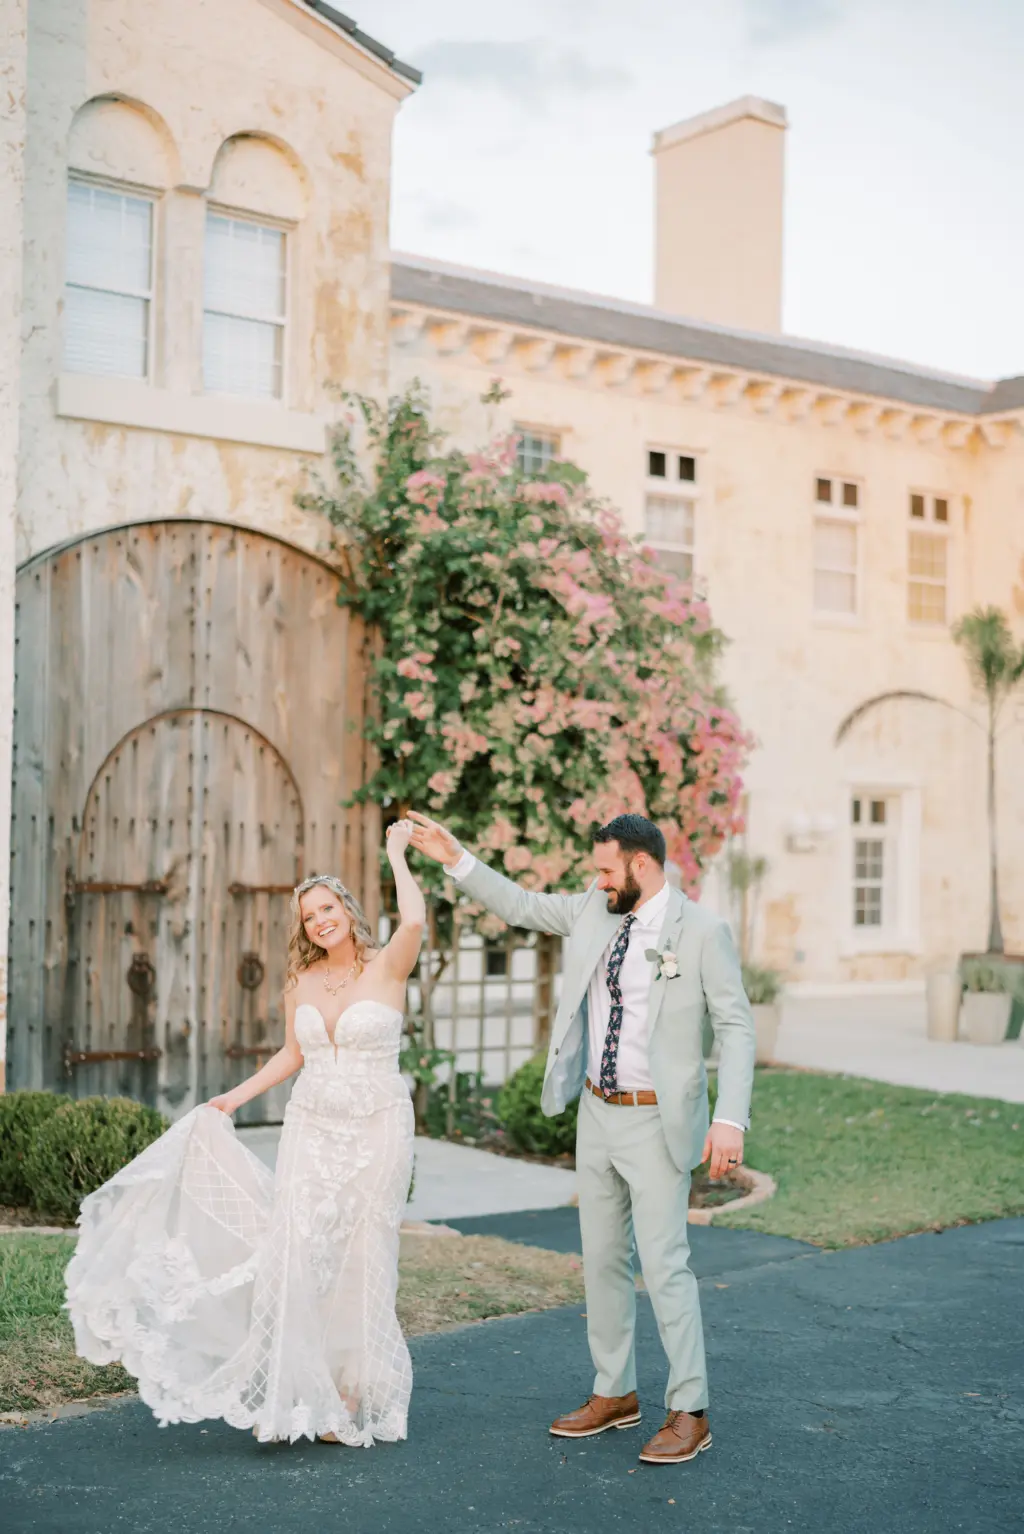 Bride and Groom Dancing in the Road Wedding Portrait | Central Florida Planner B Eventful | Venue Lake Wales Bella Cosa Lakeside